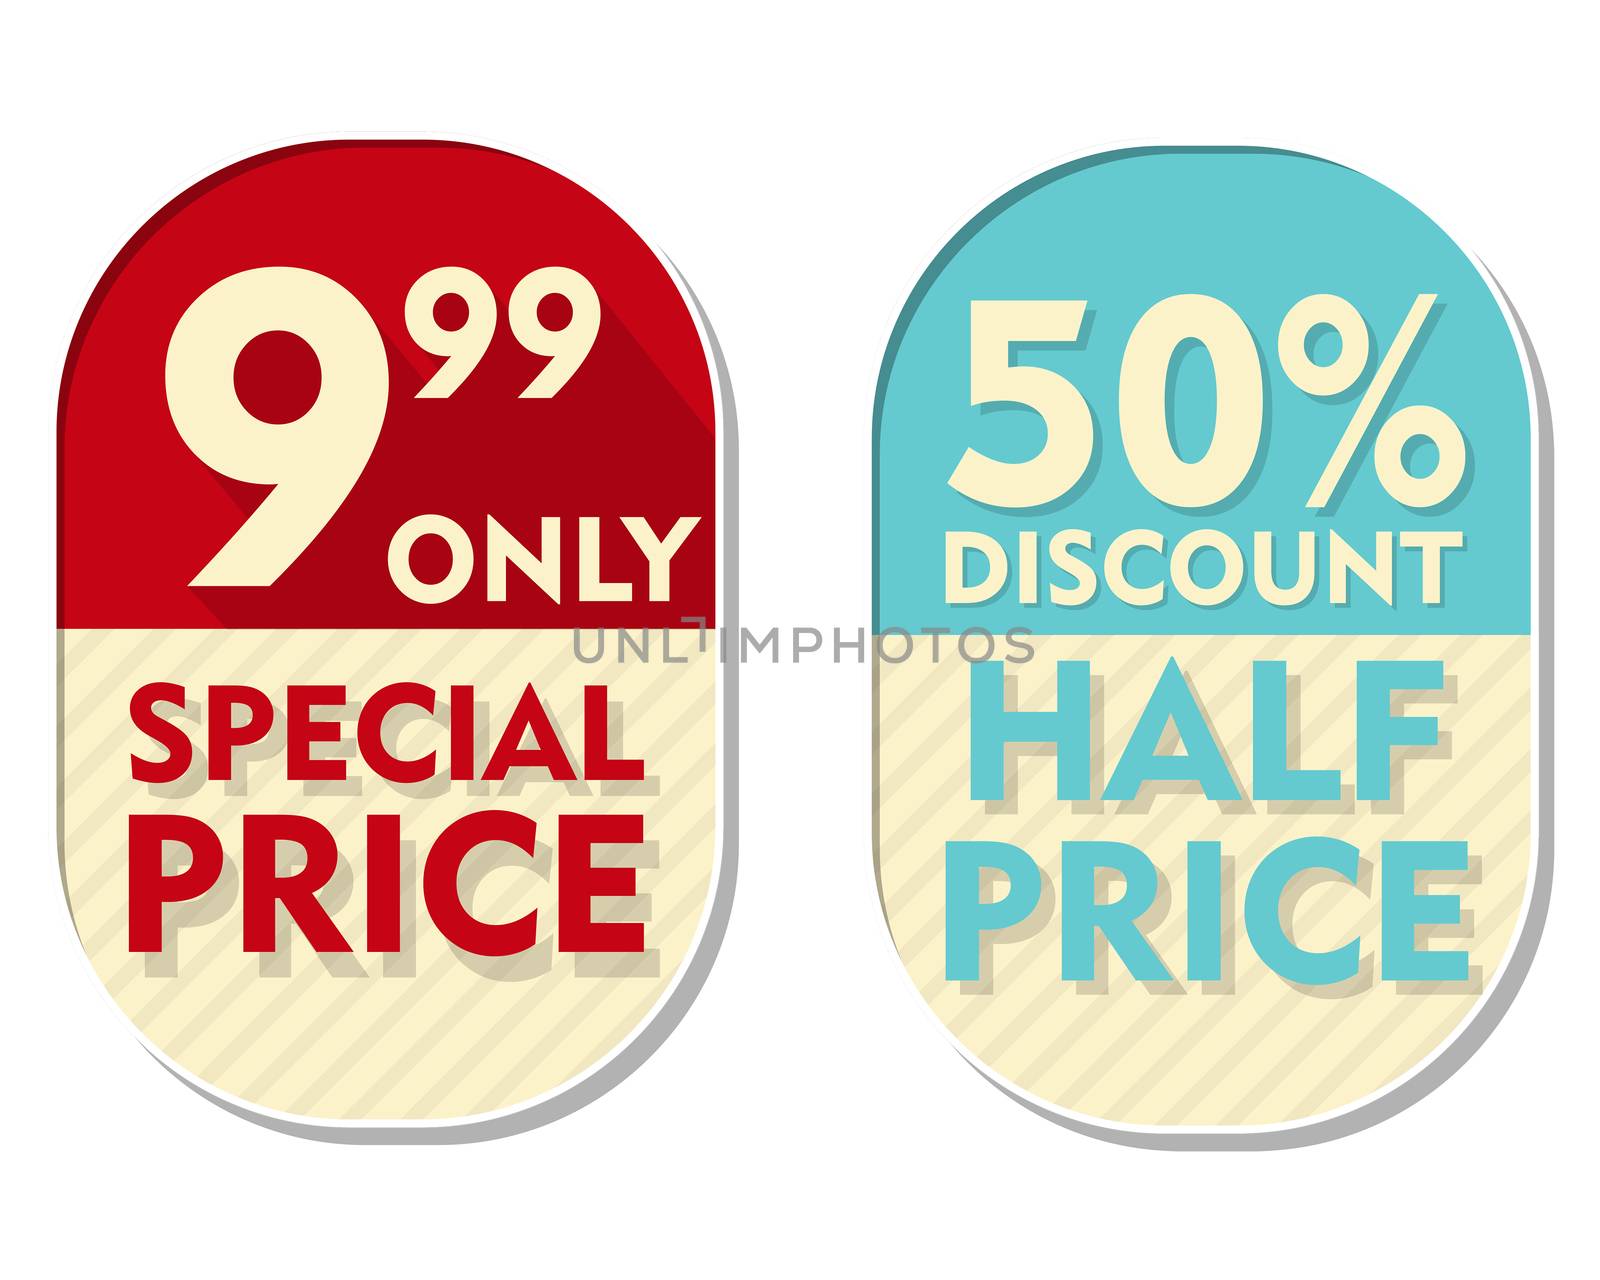 9,99 only, 50 percent discount, special and half price, two elli by marinini